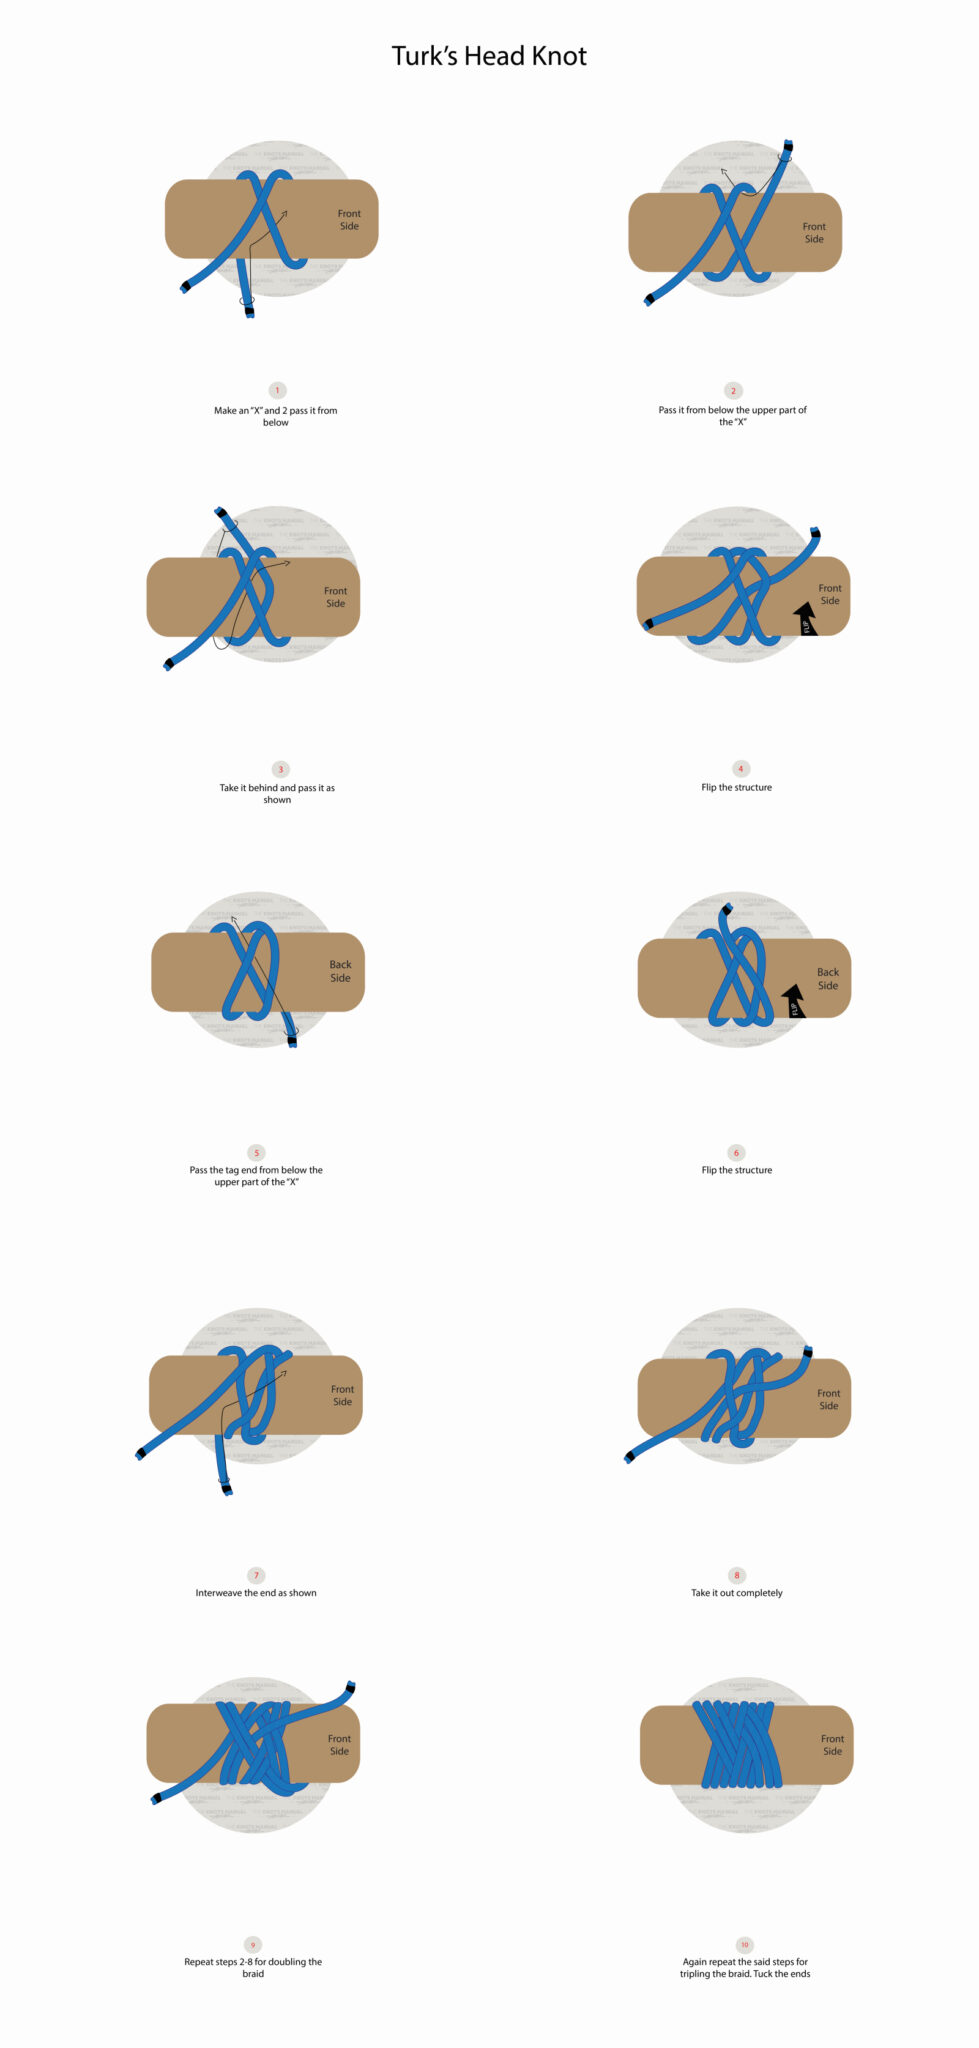 How To Tie A Turk’s Head Knot